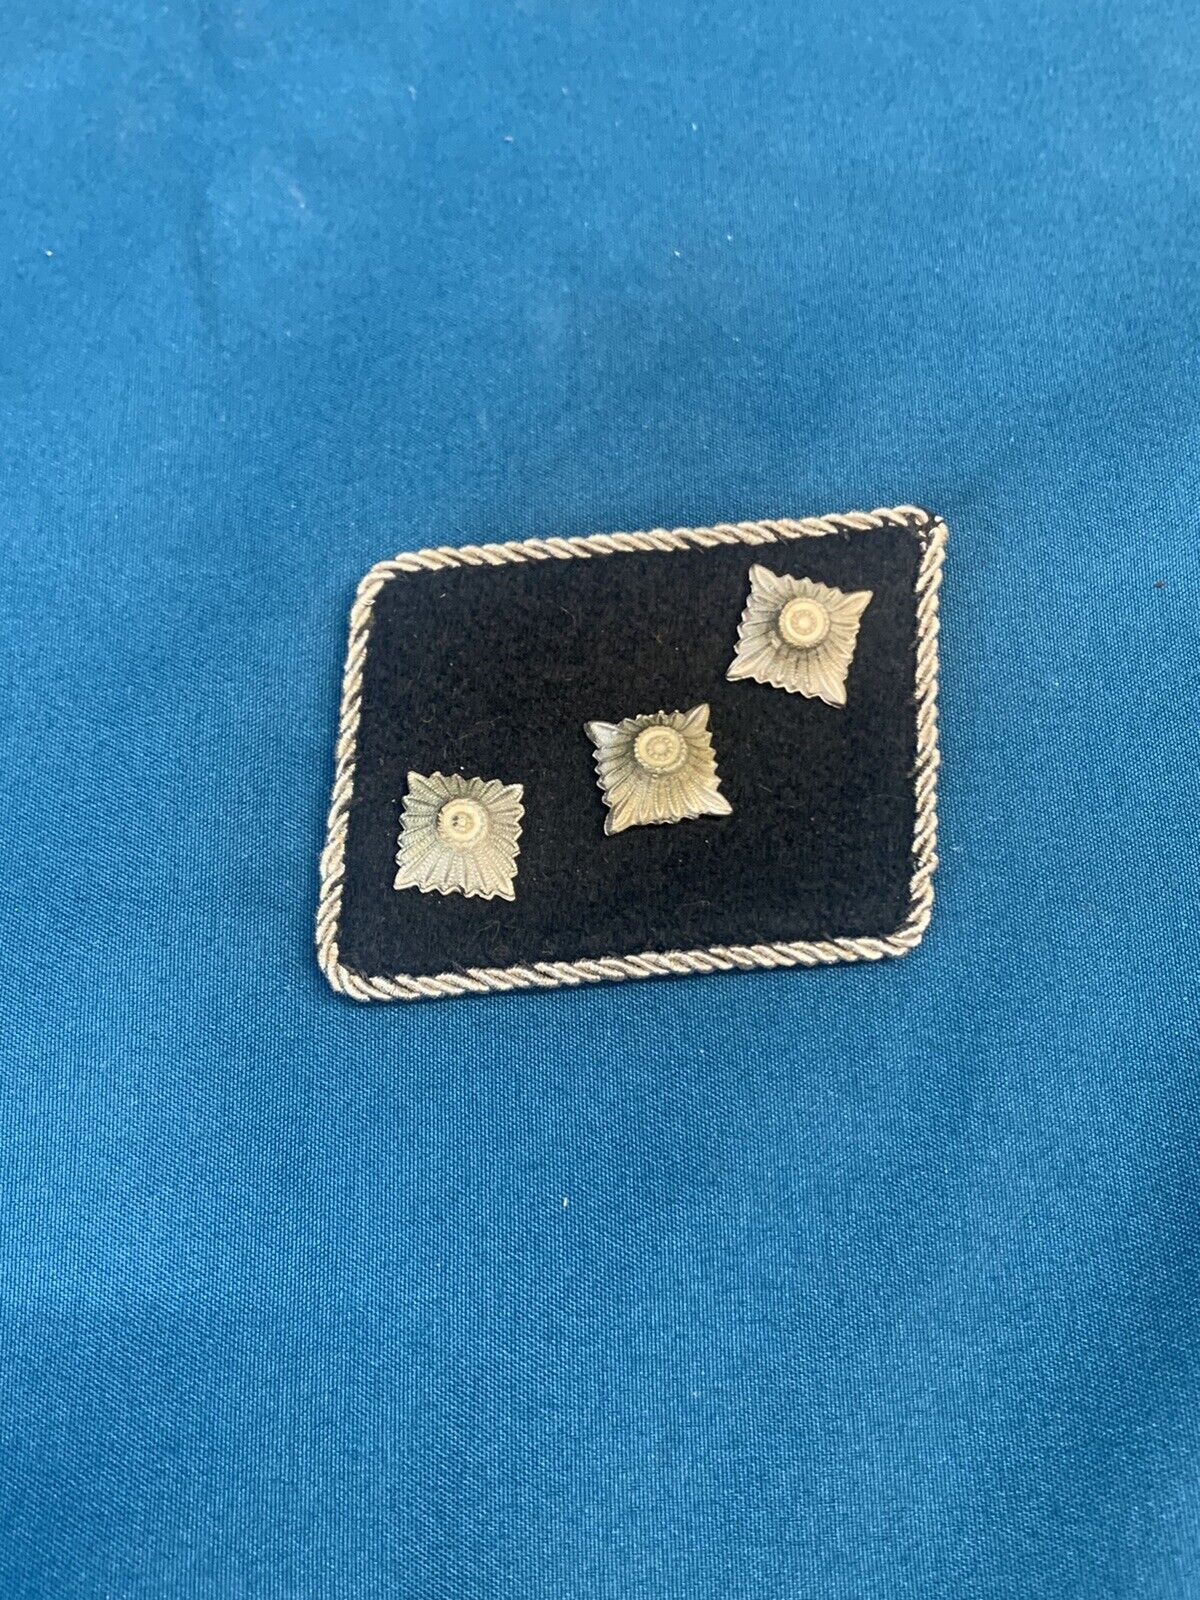 Ww2 German Shoulder Tab With 3 Buttons